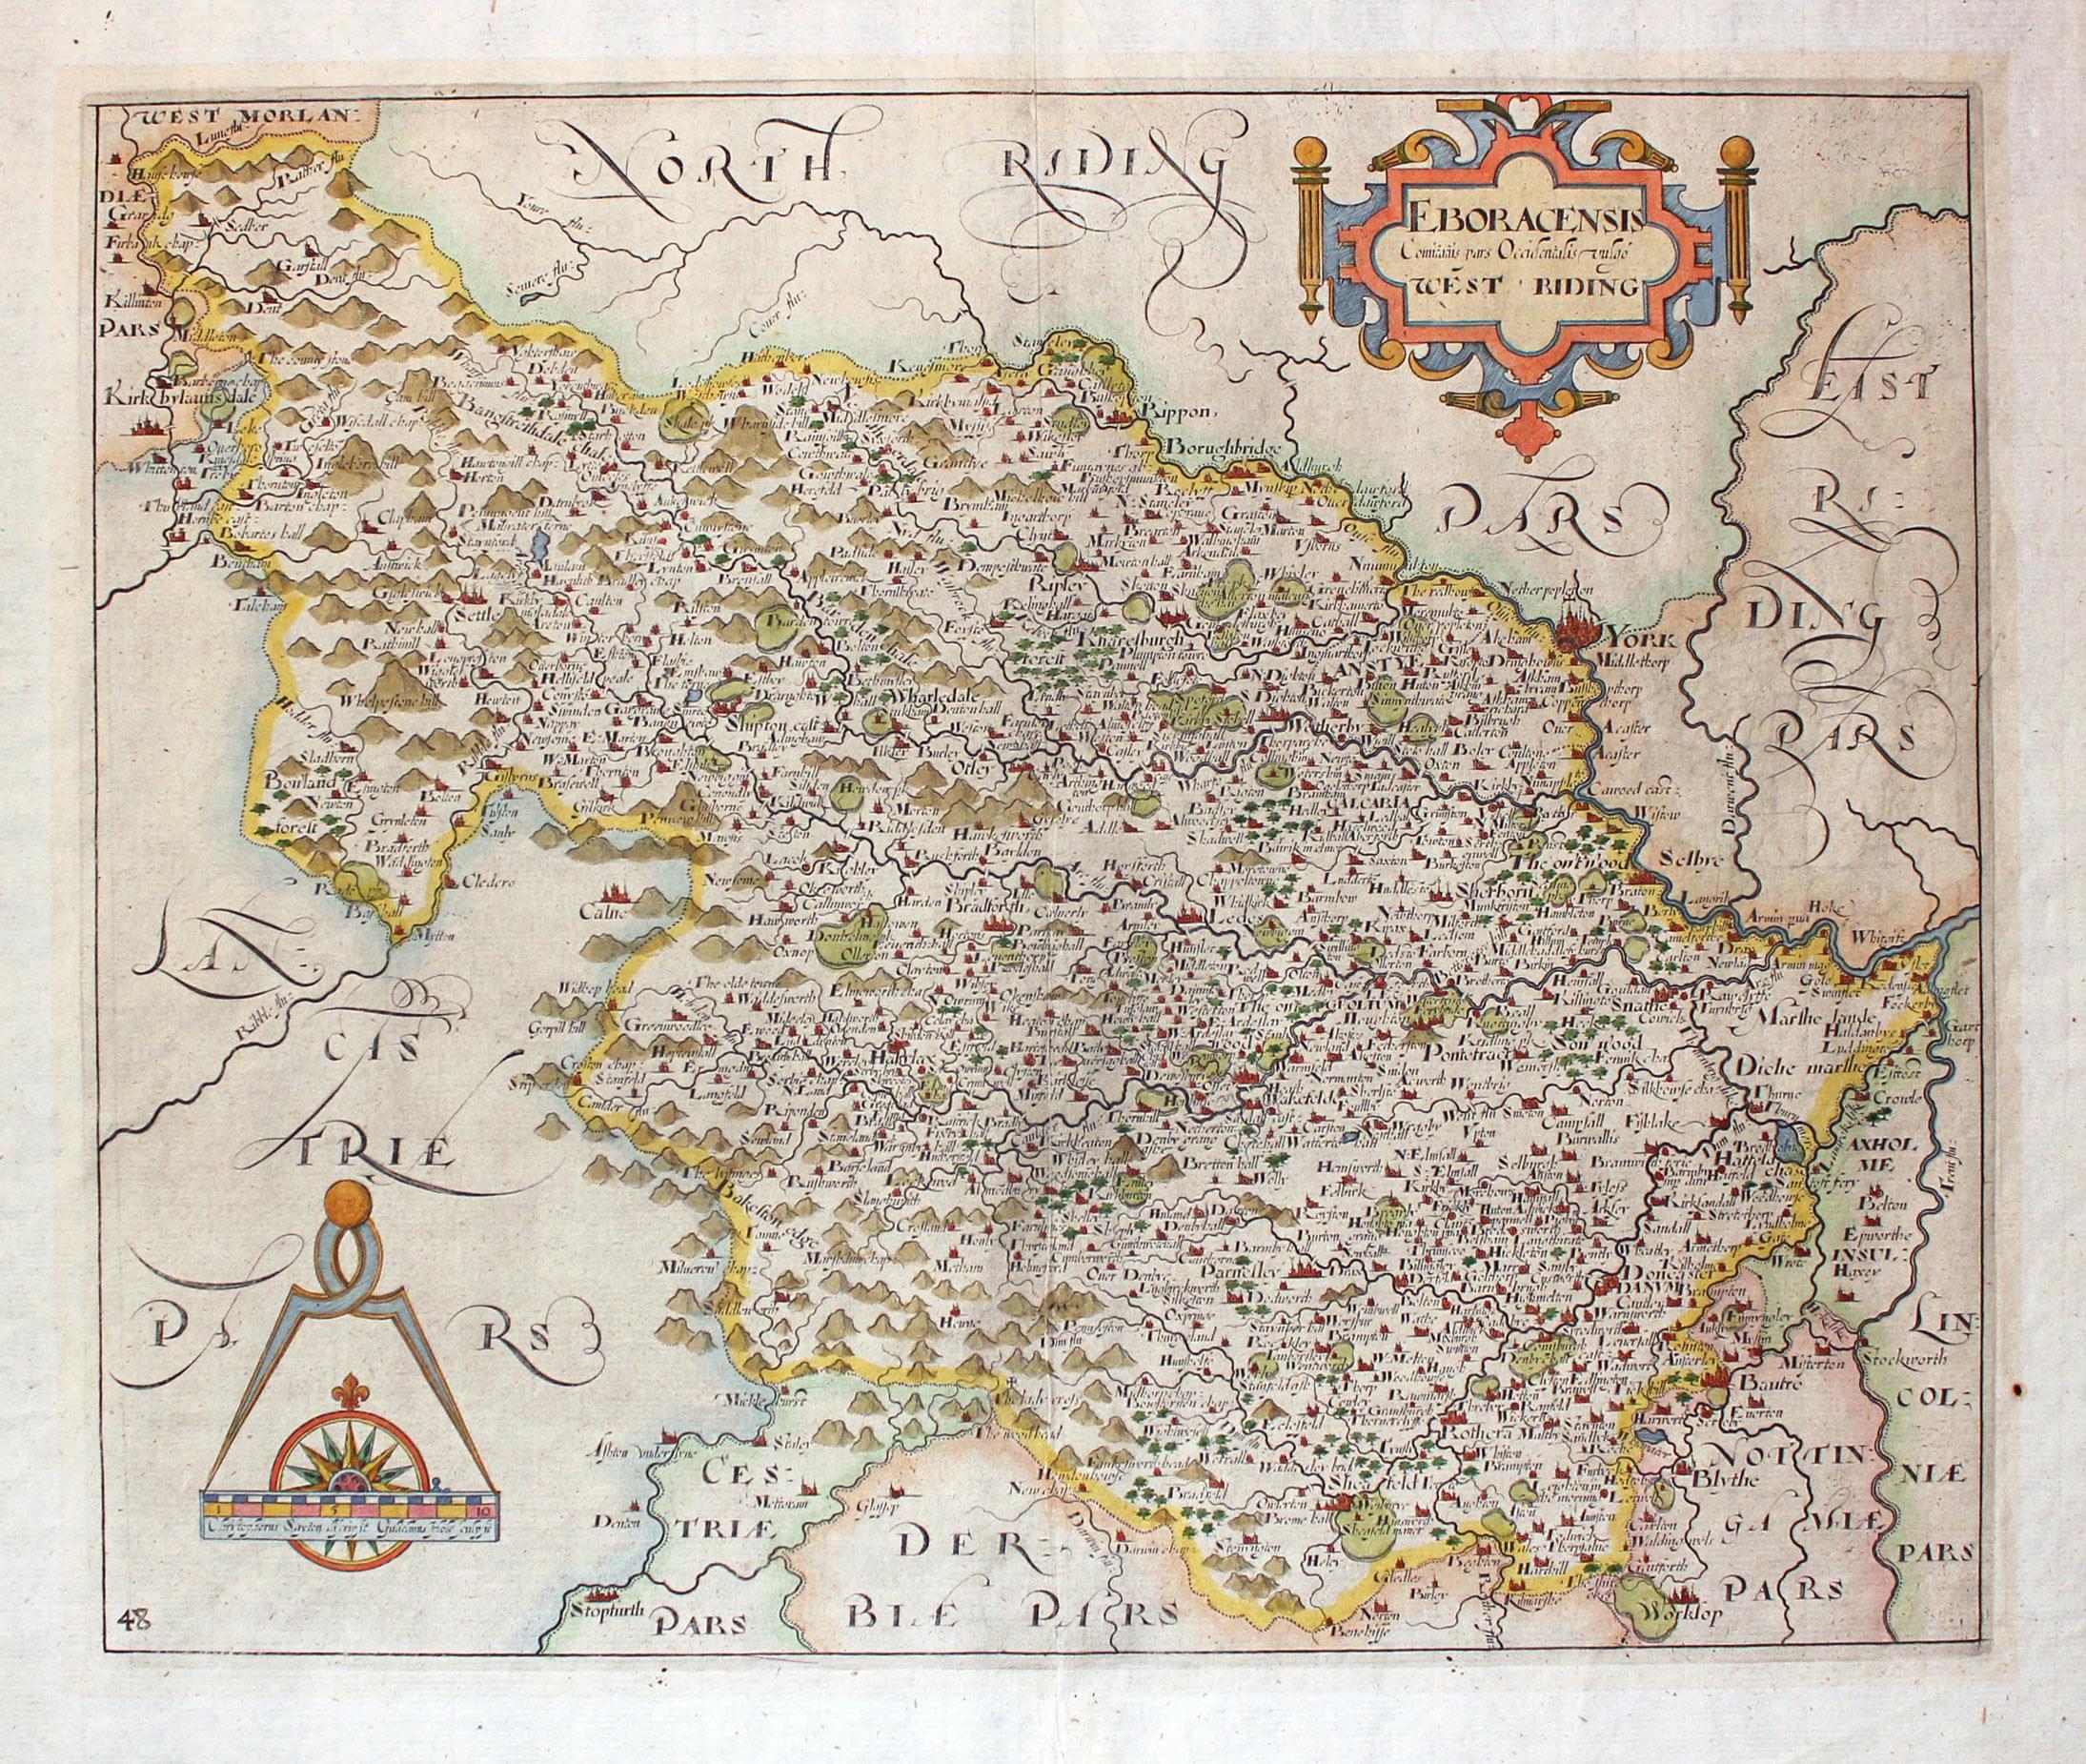 Map of West Riding of Yorkshire by William Hole after Christopher Saxton, 1637